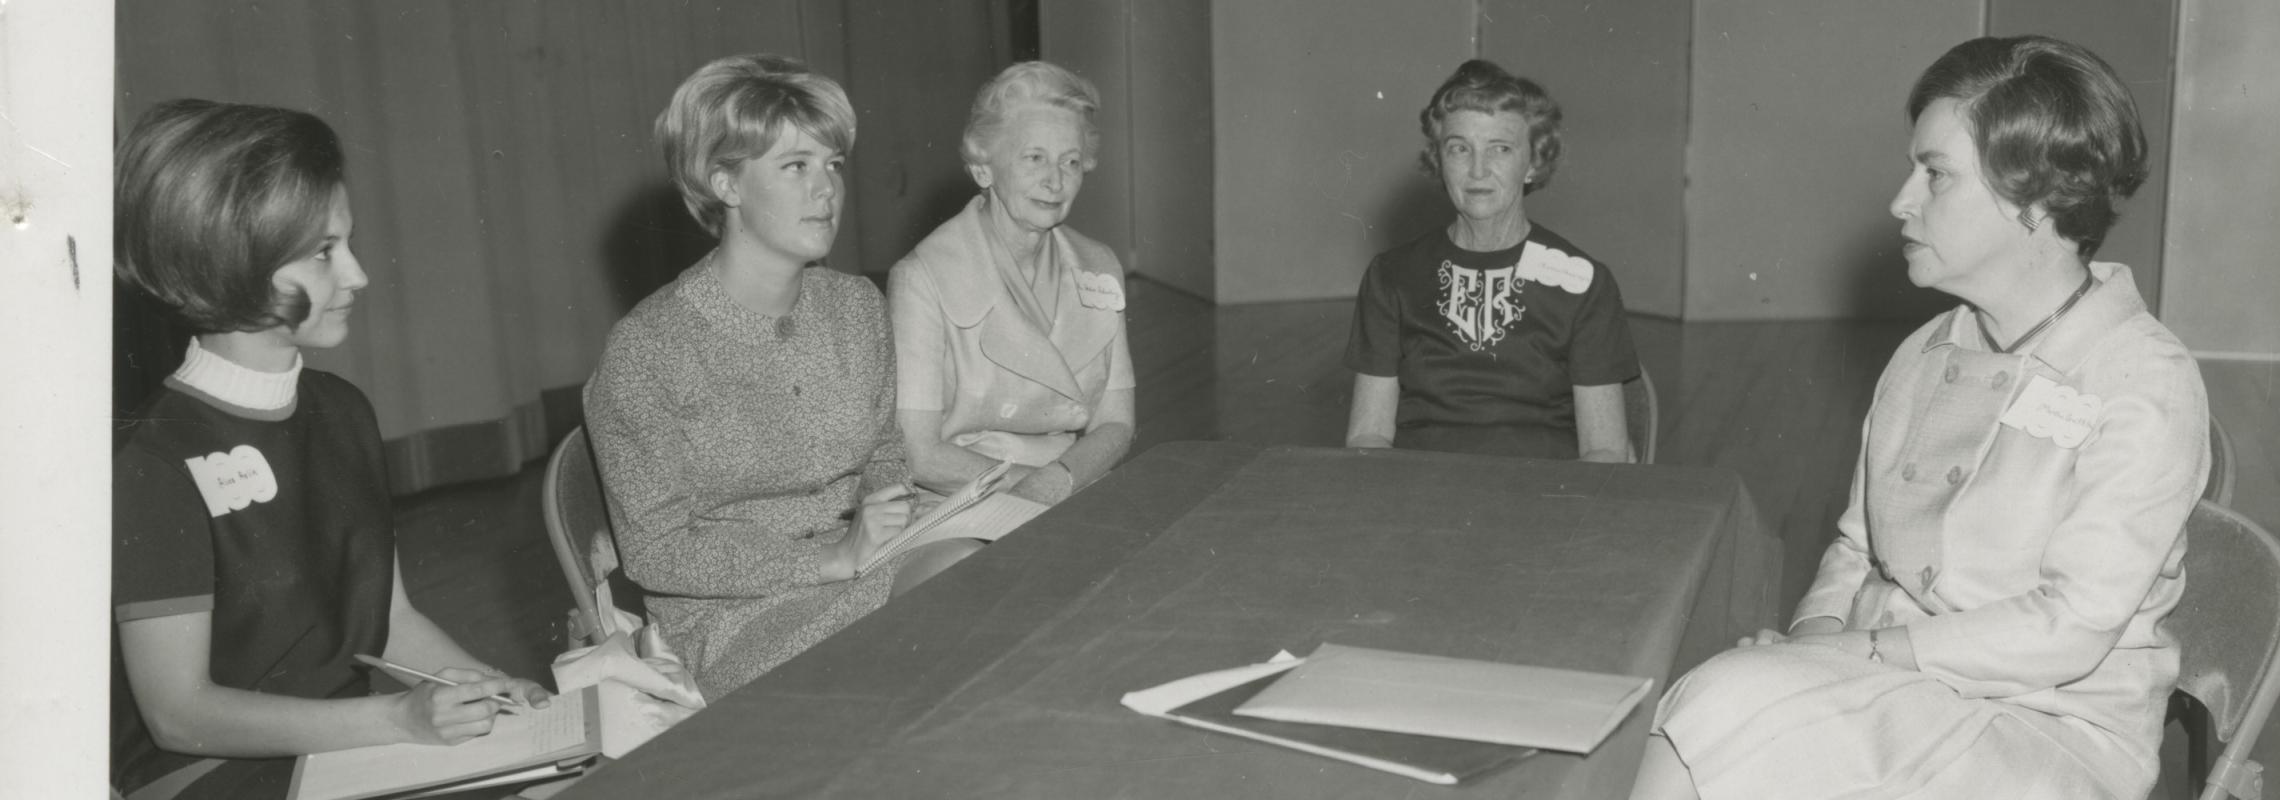 Martha Griffiths, member of the U.S. Congress, meets with guests at an Admission of Women Centennial event at the University of Missouri in 1968.